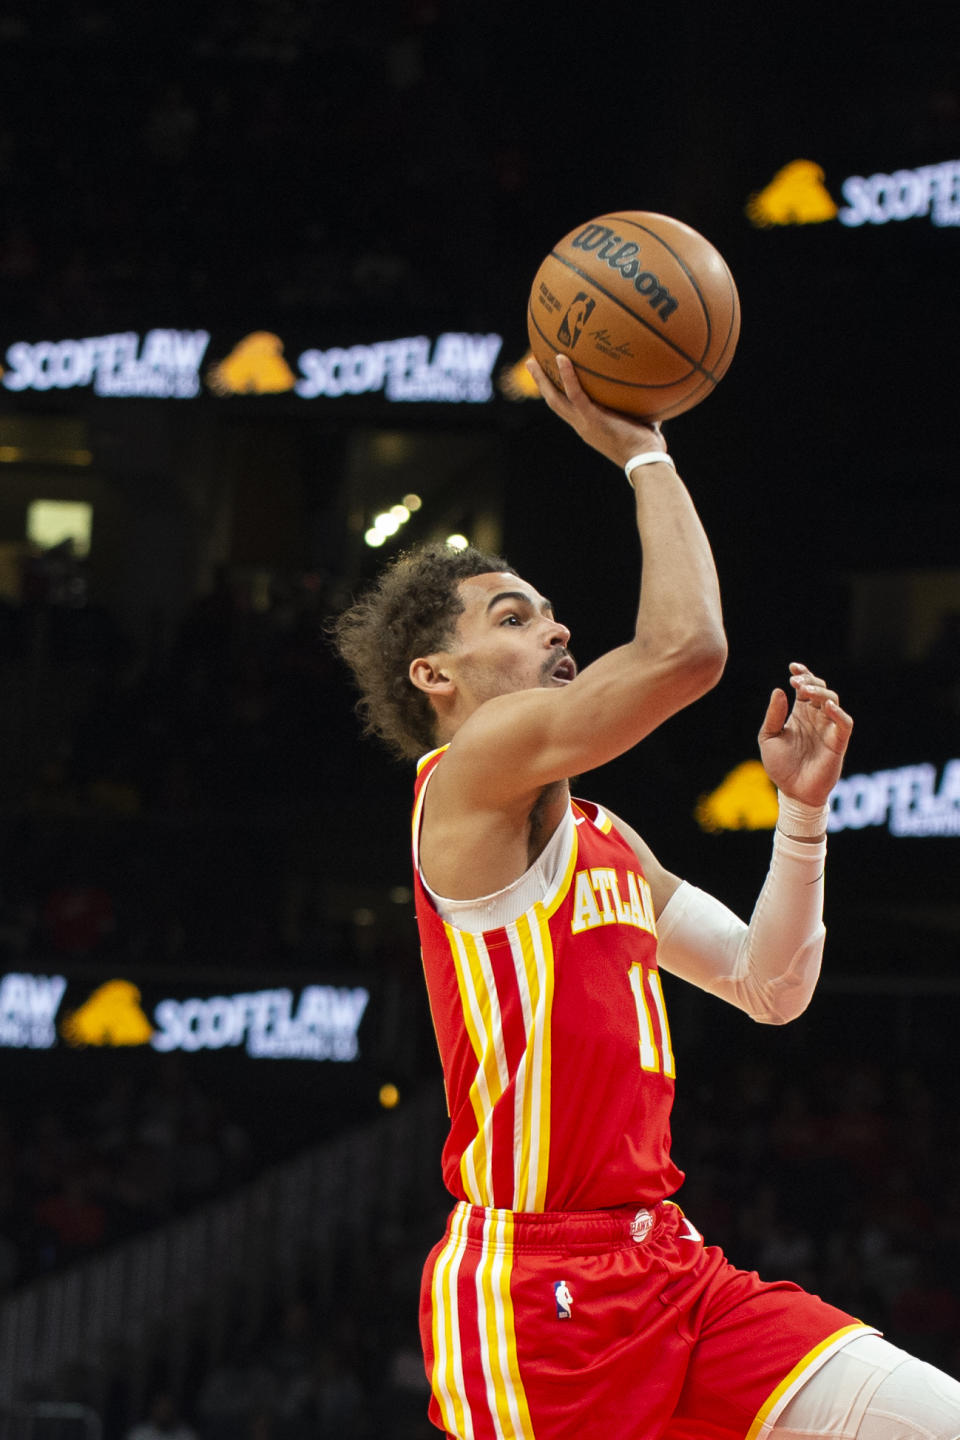 Atlanta Hawks guard Trae Young shoots during the second half of an NBA basketball game against Indiana Pacer, Saturday, March 25, 2023, in Atlanta. (AP Photo/Hakim Wright Sr.)